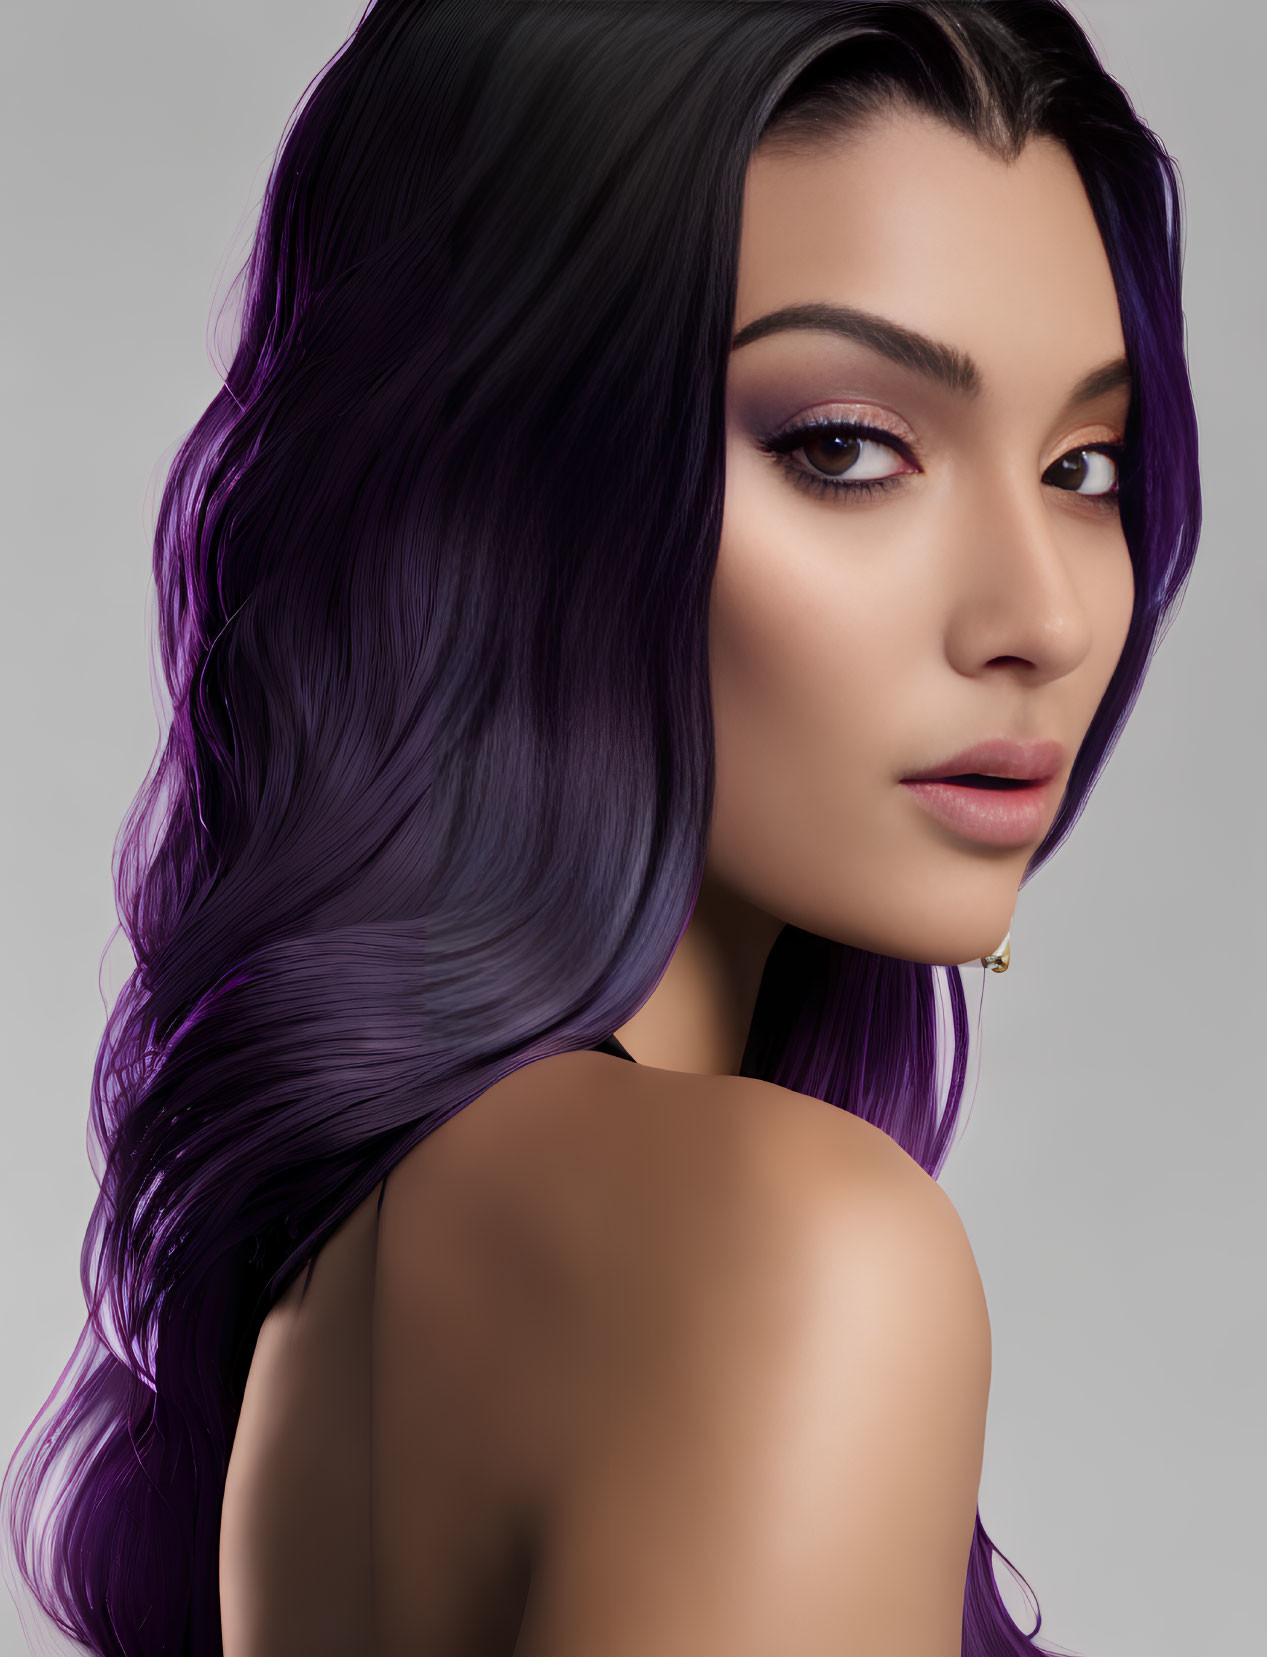 Digital portrait of woman with flowing purple hair and perfect makeup on gray background